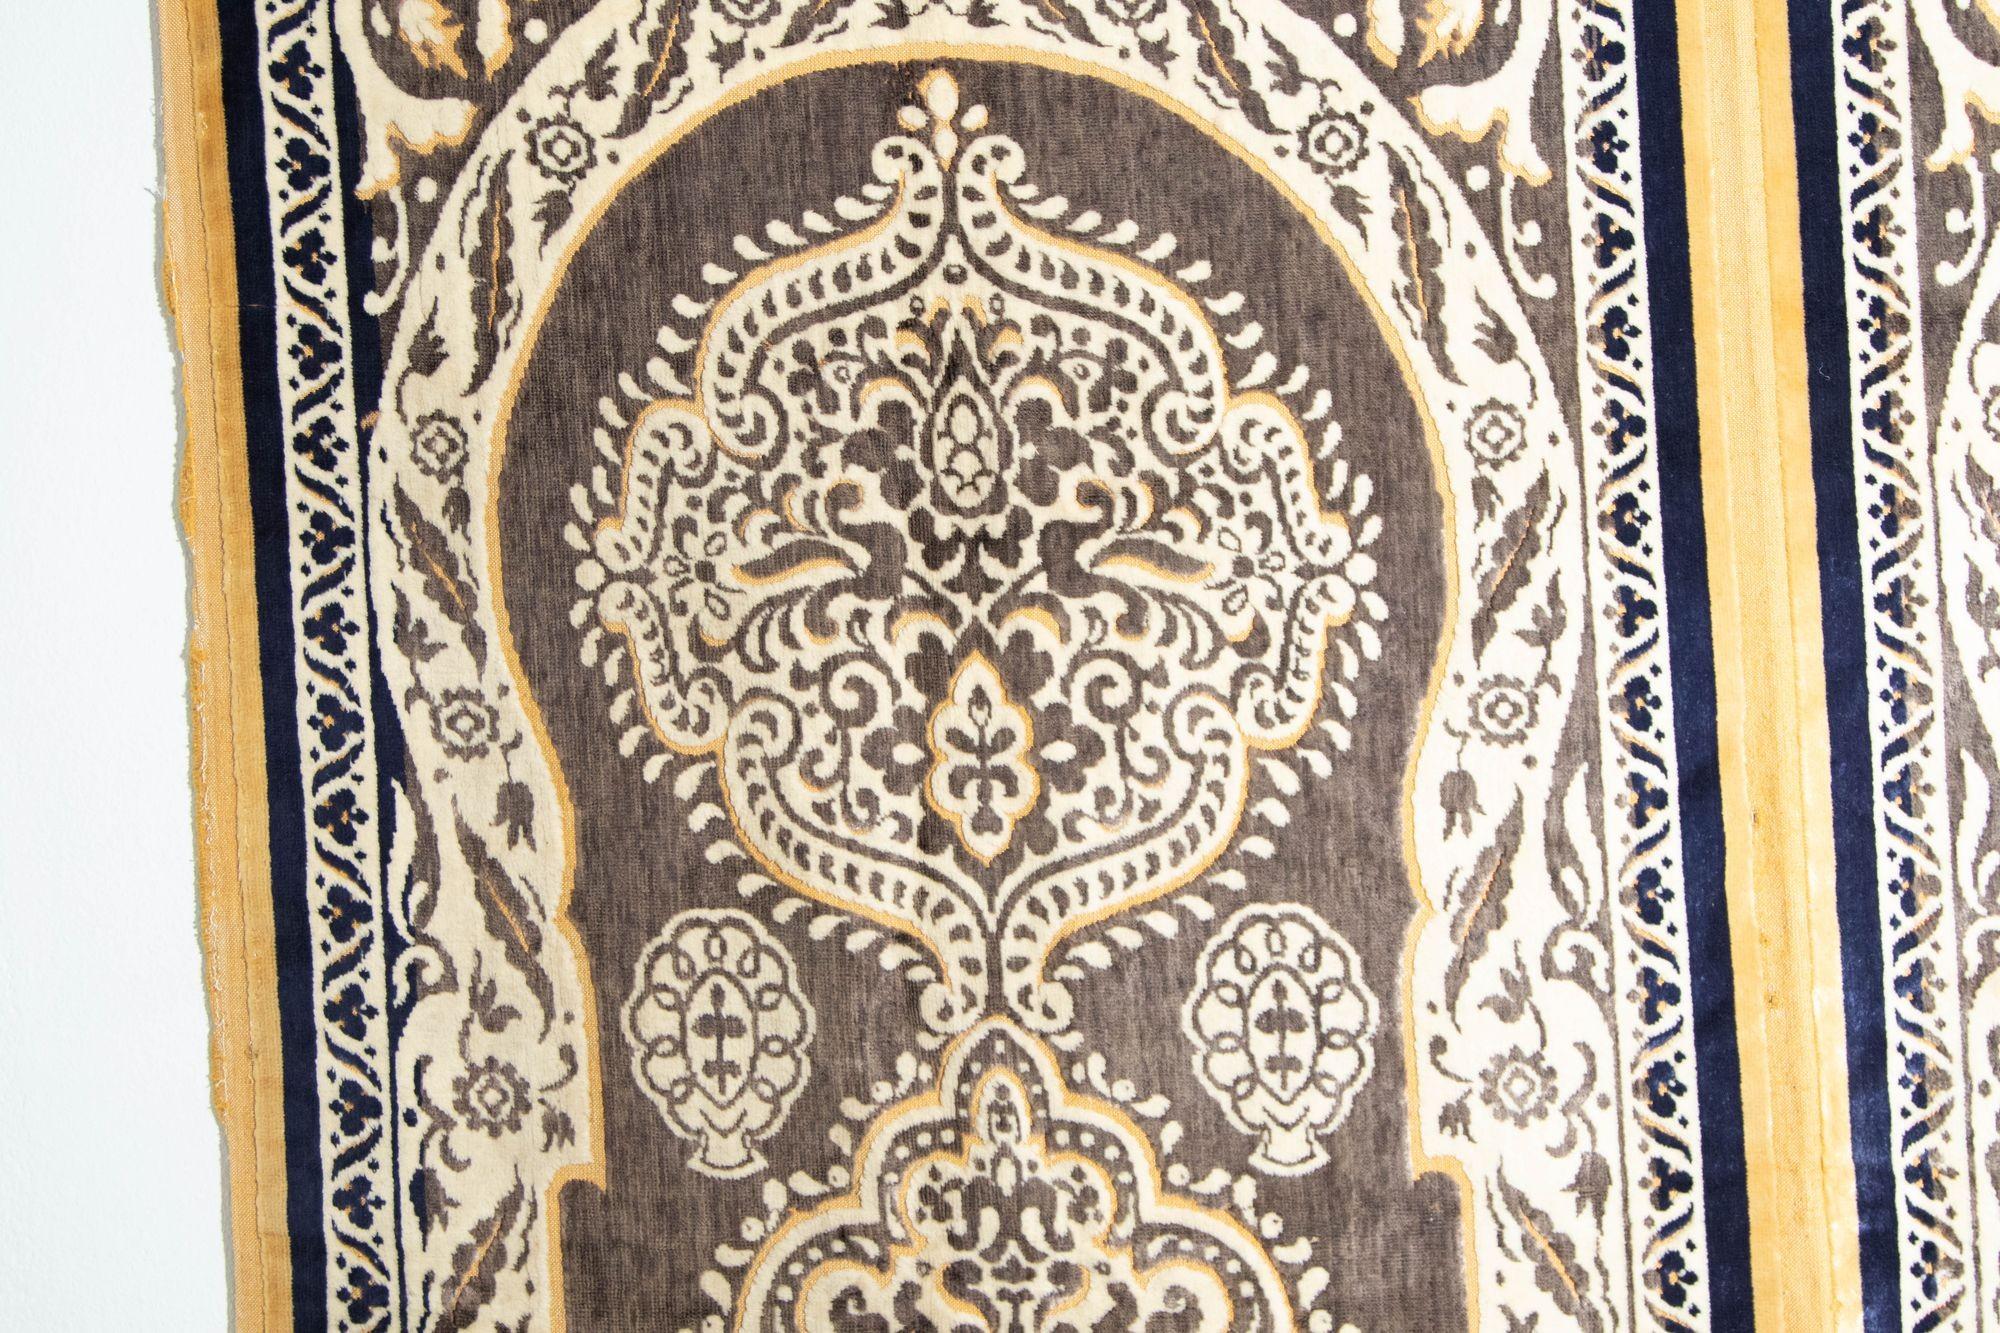 Antique Moroccan Moorish Silk Textile Tapestry Wall Hanging Hiti 19th C. For Sale 1